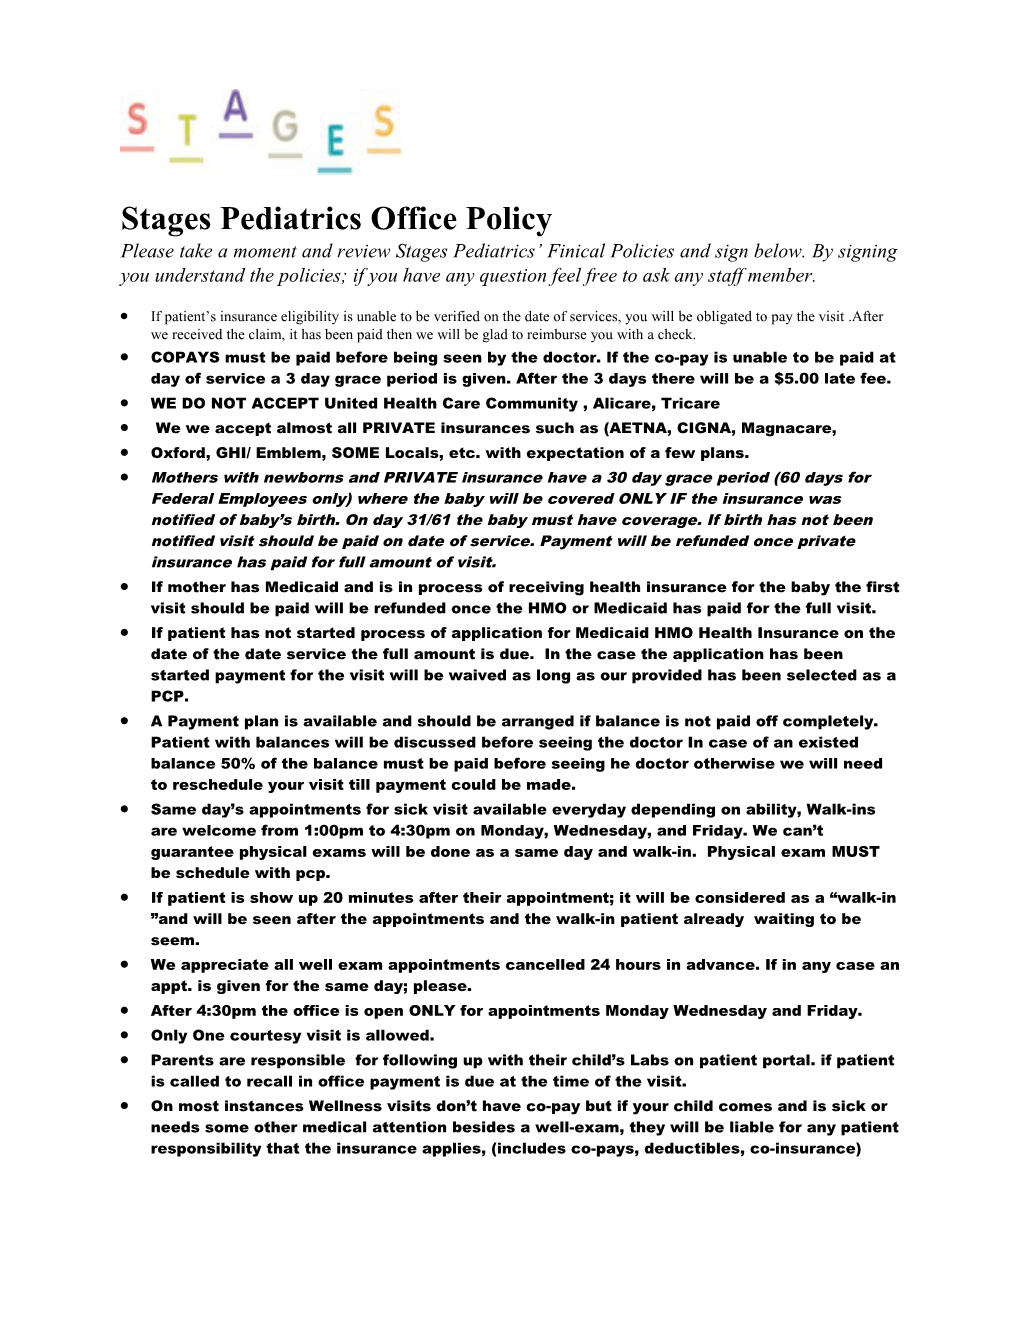 Stages Pediatrics Office Policy